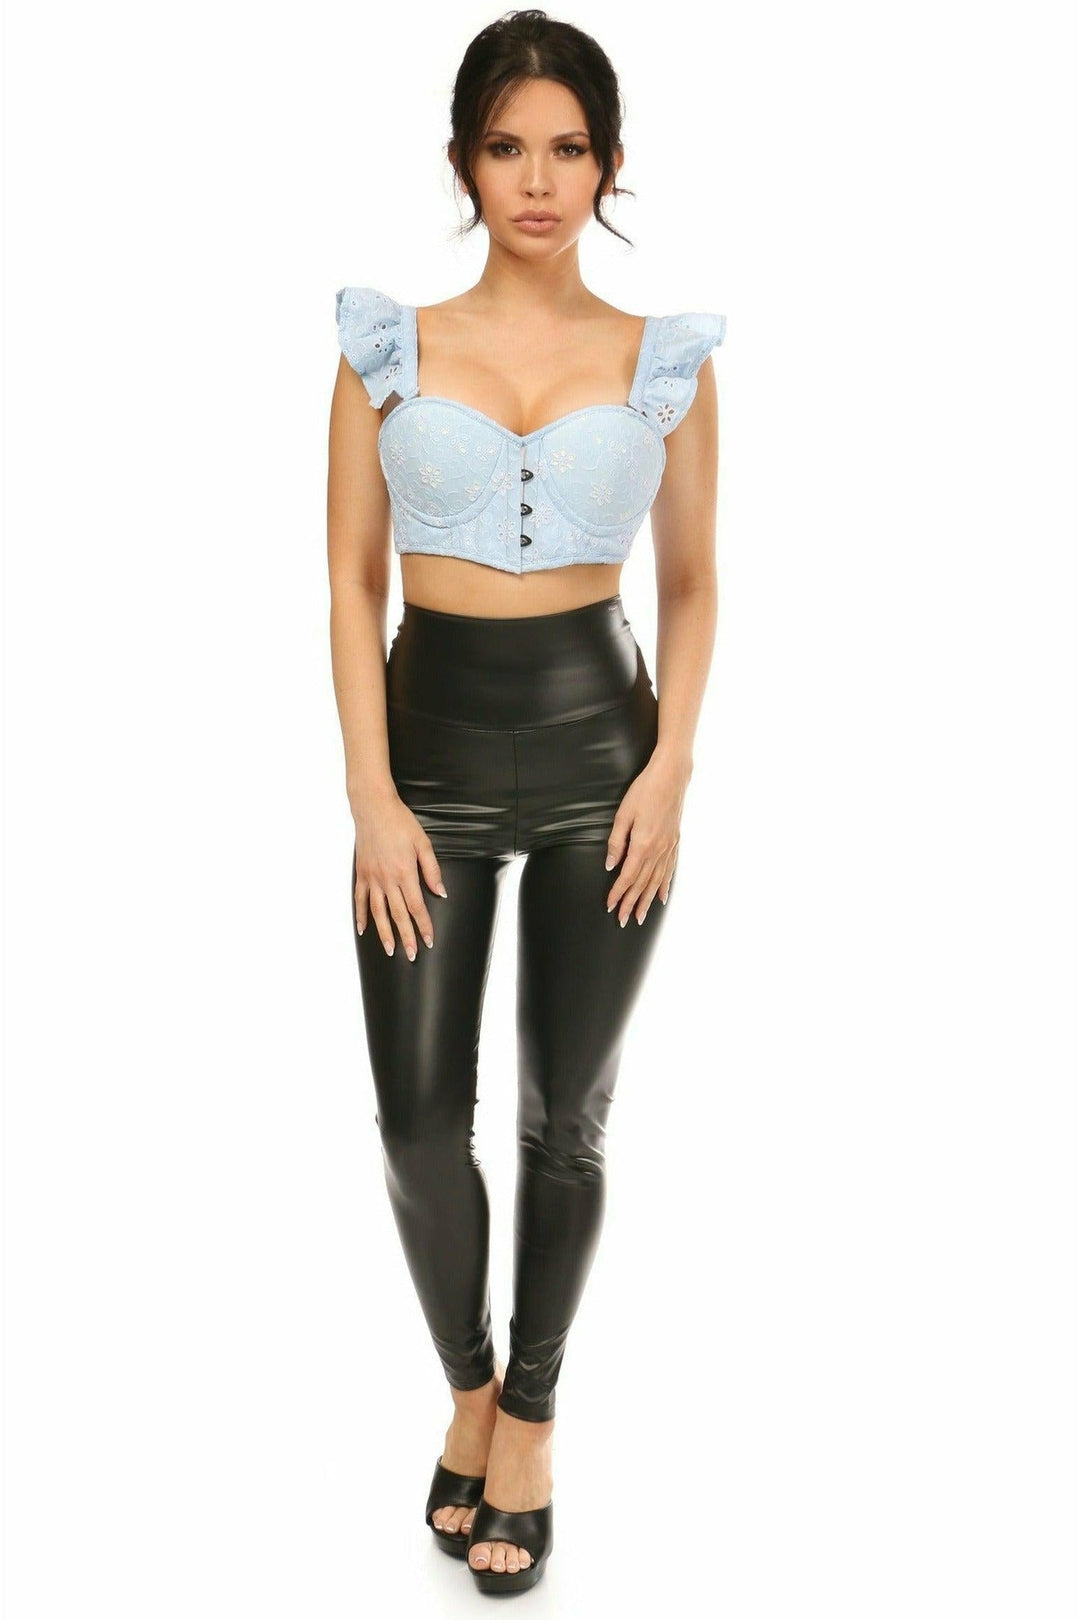 Lavish Lt Blue Eyelet Underwire Bustier Top w/Removable Ruffle Sleeves